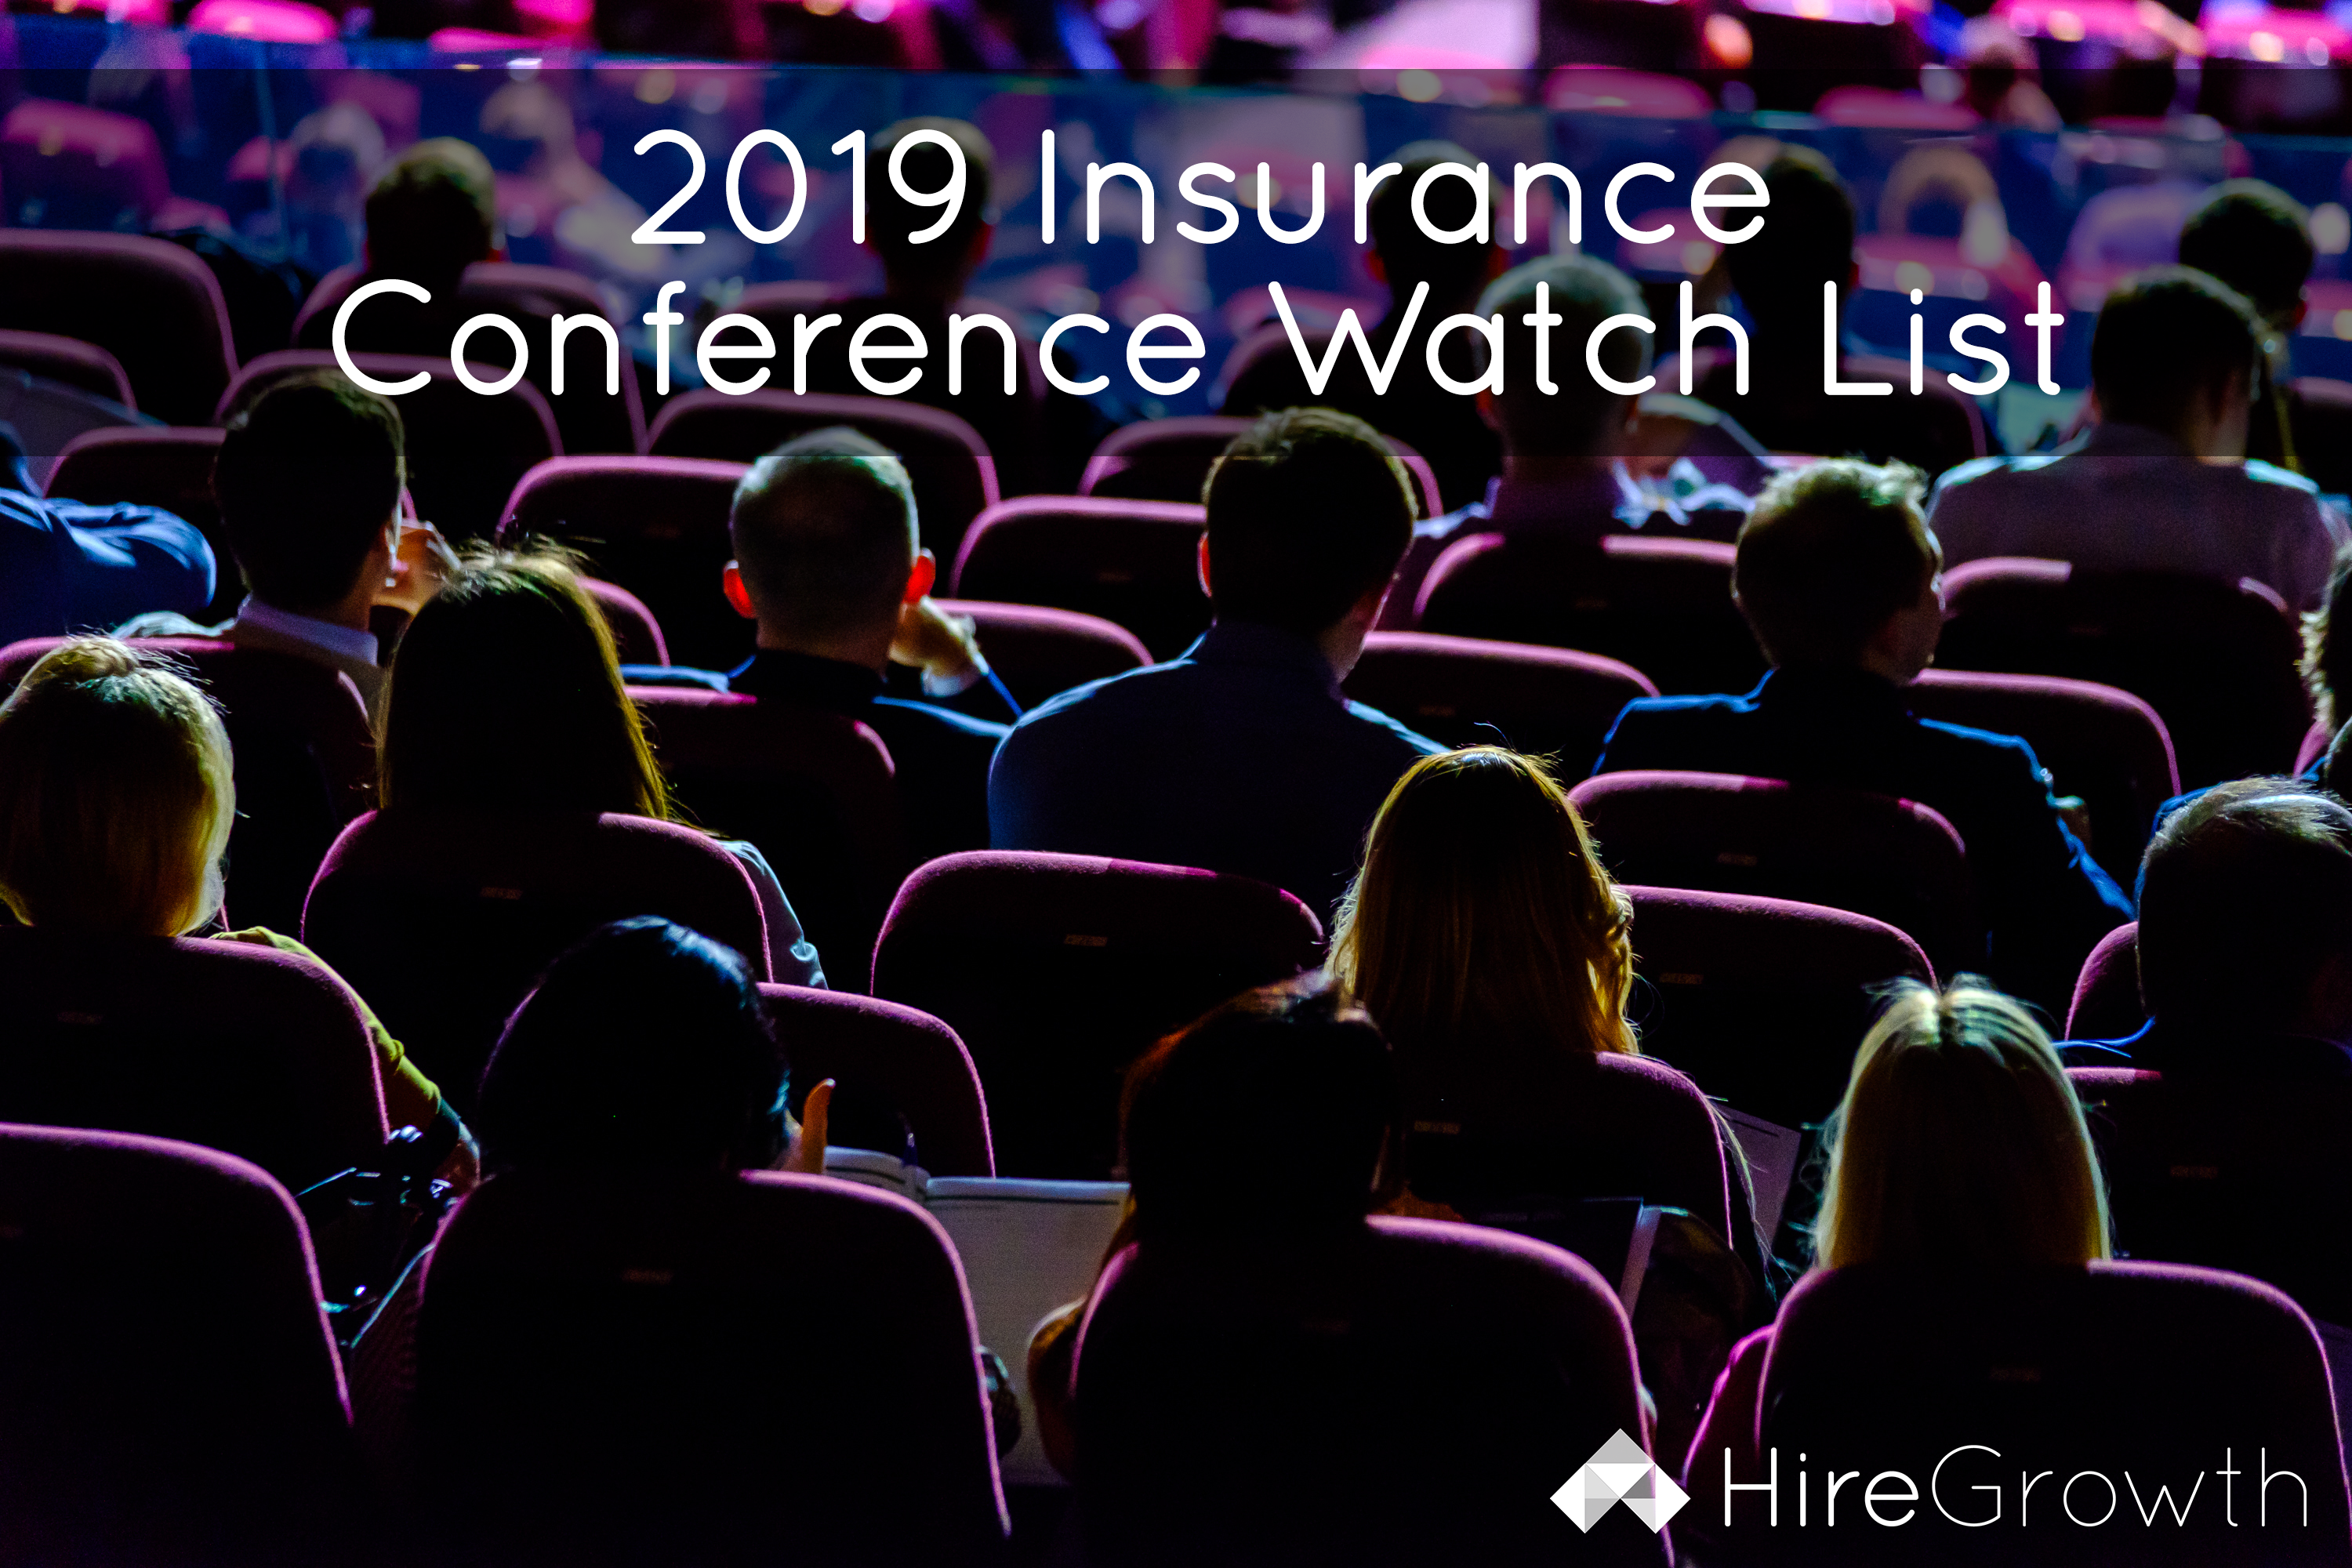 2019 Insurance Conference Watch List